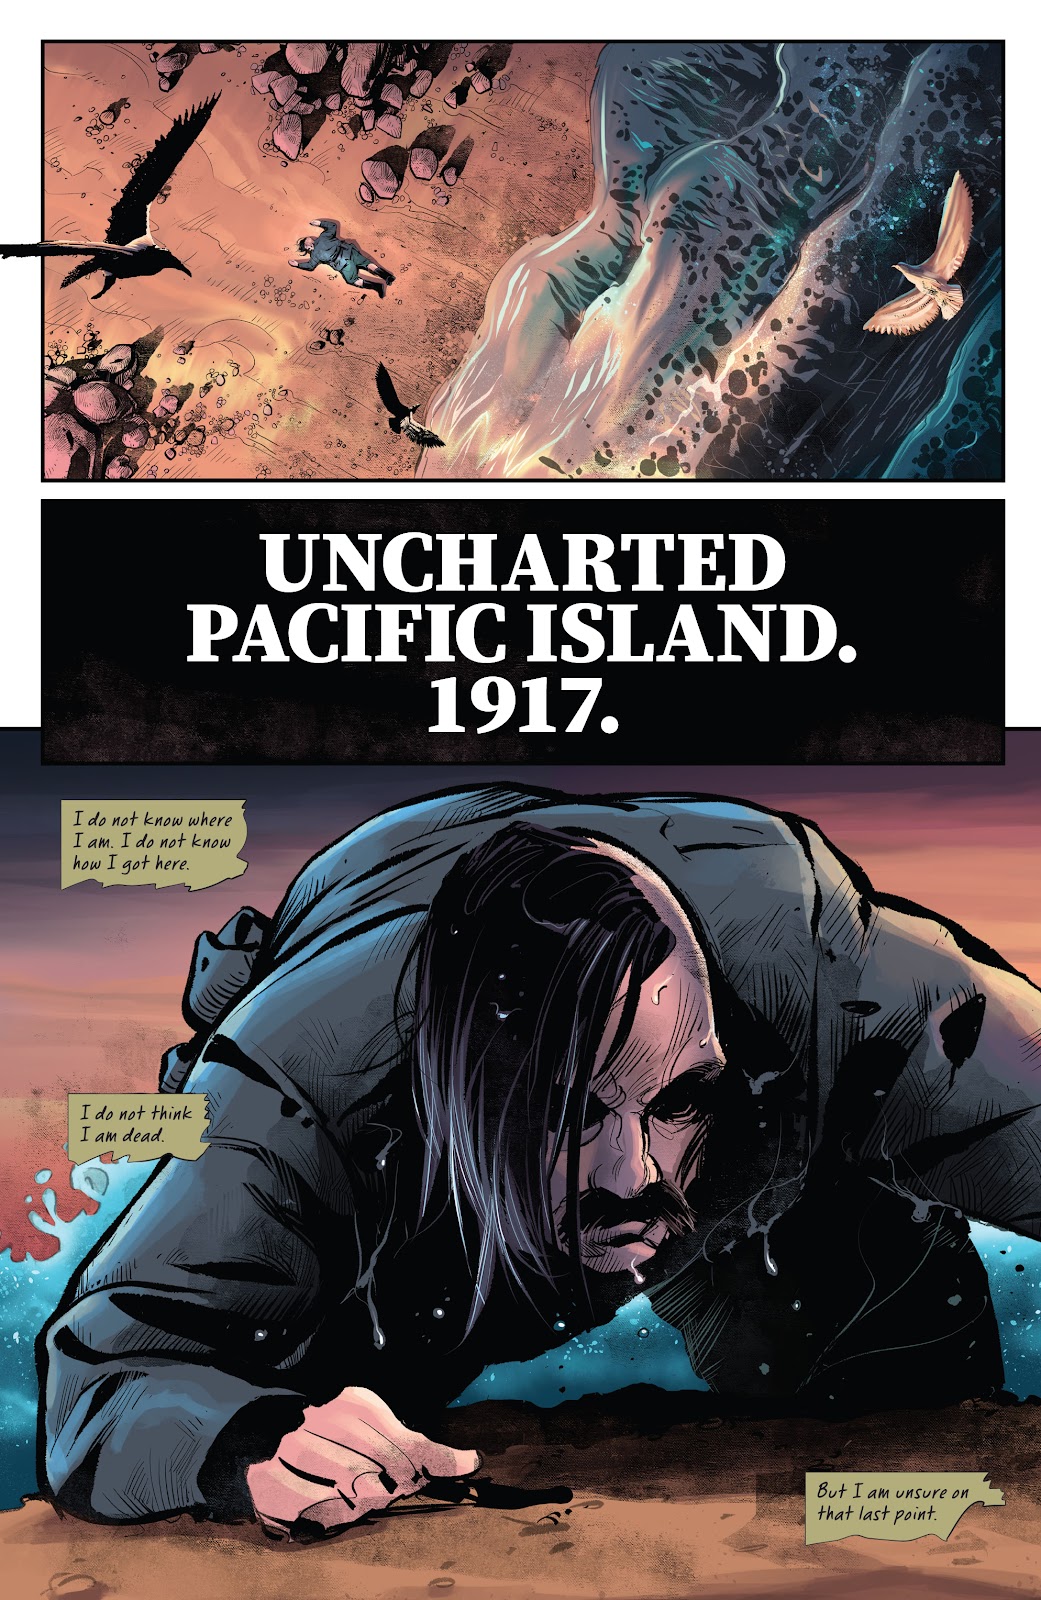 Kong: The Great War issue 1 - Page 5